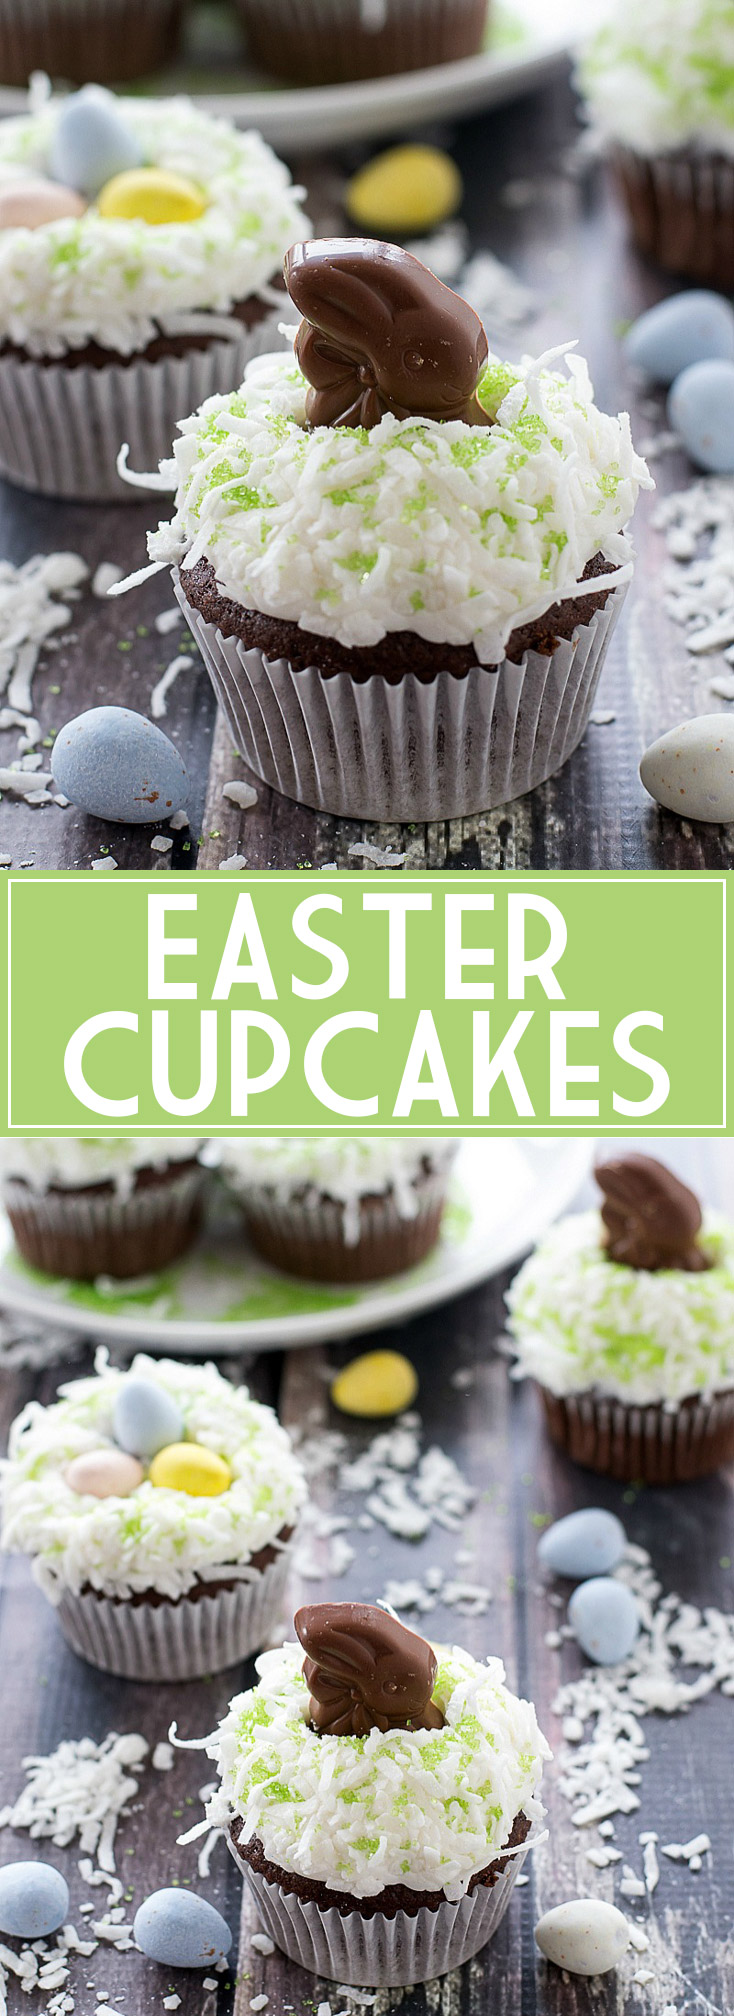 Easter Cupcakes | www.motherthyme.com